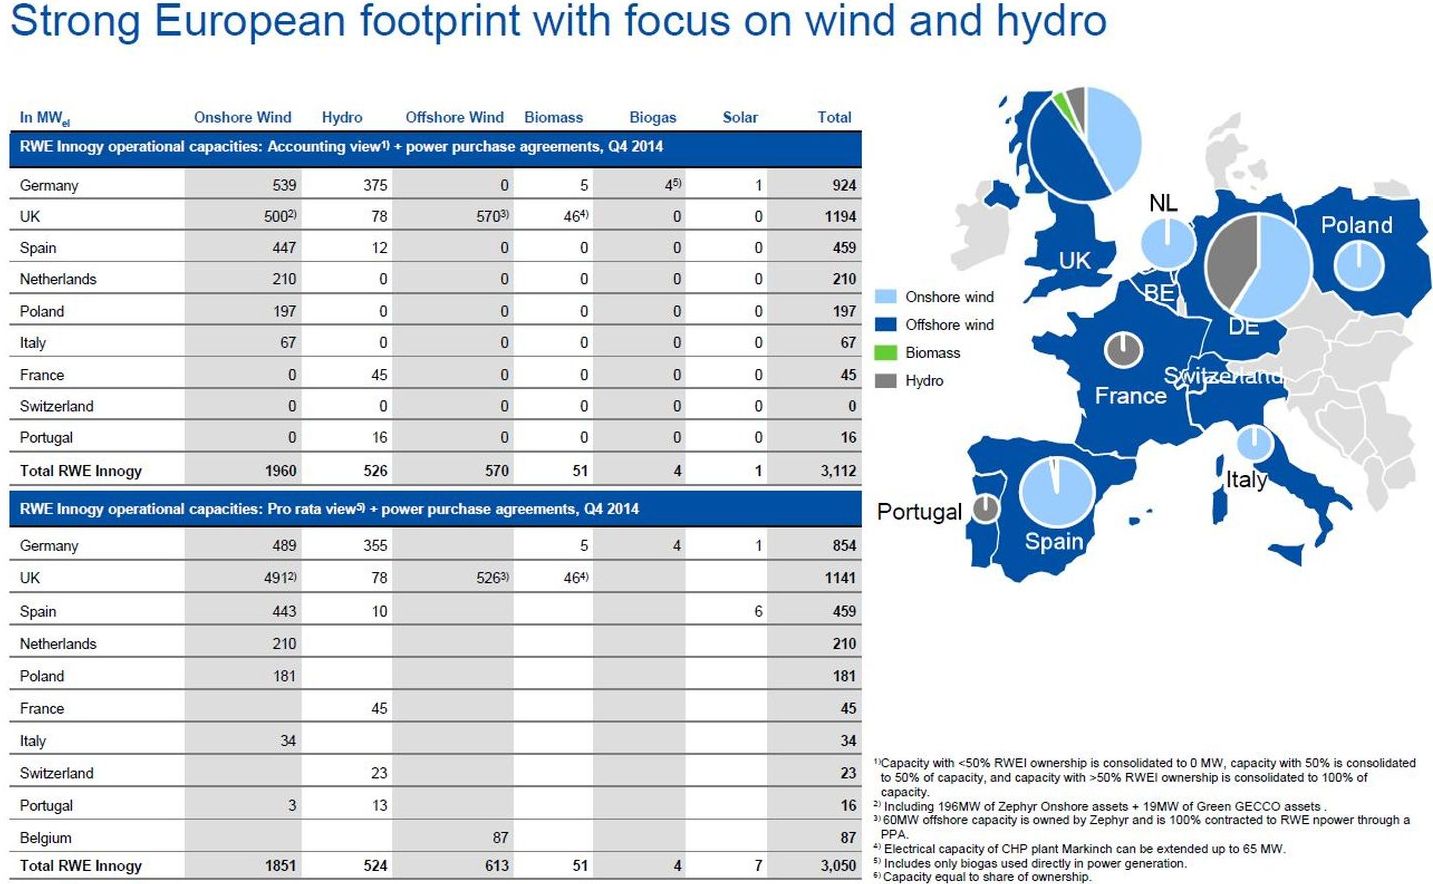 A infographic about the European footprint with focus on wind and hydro by the German energy supplier RWE. 